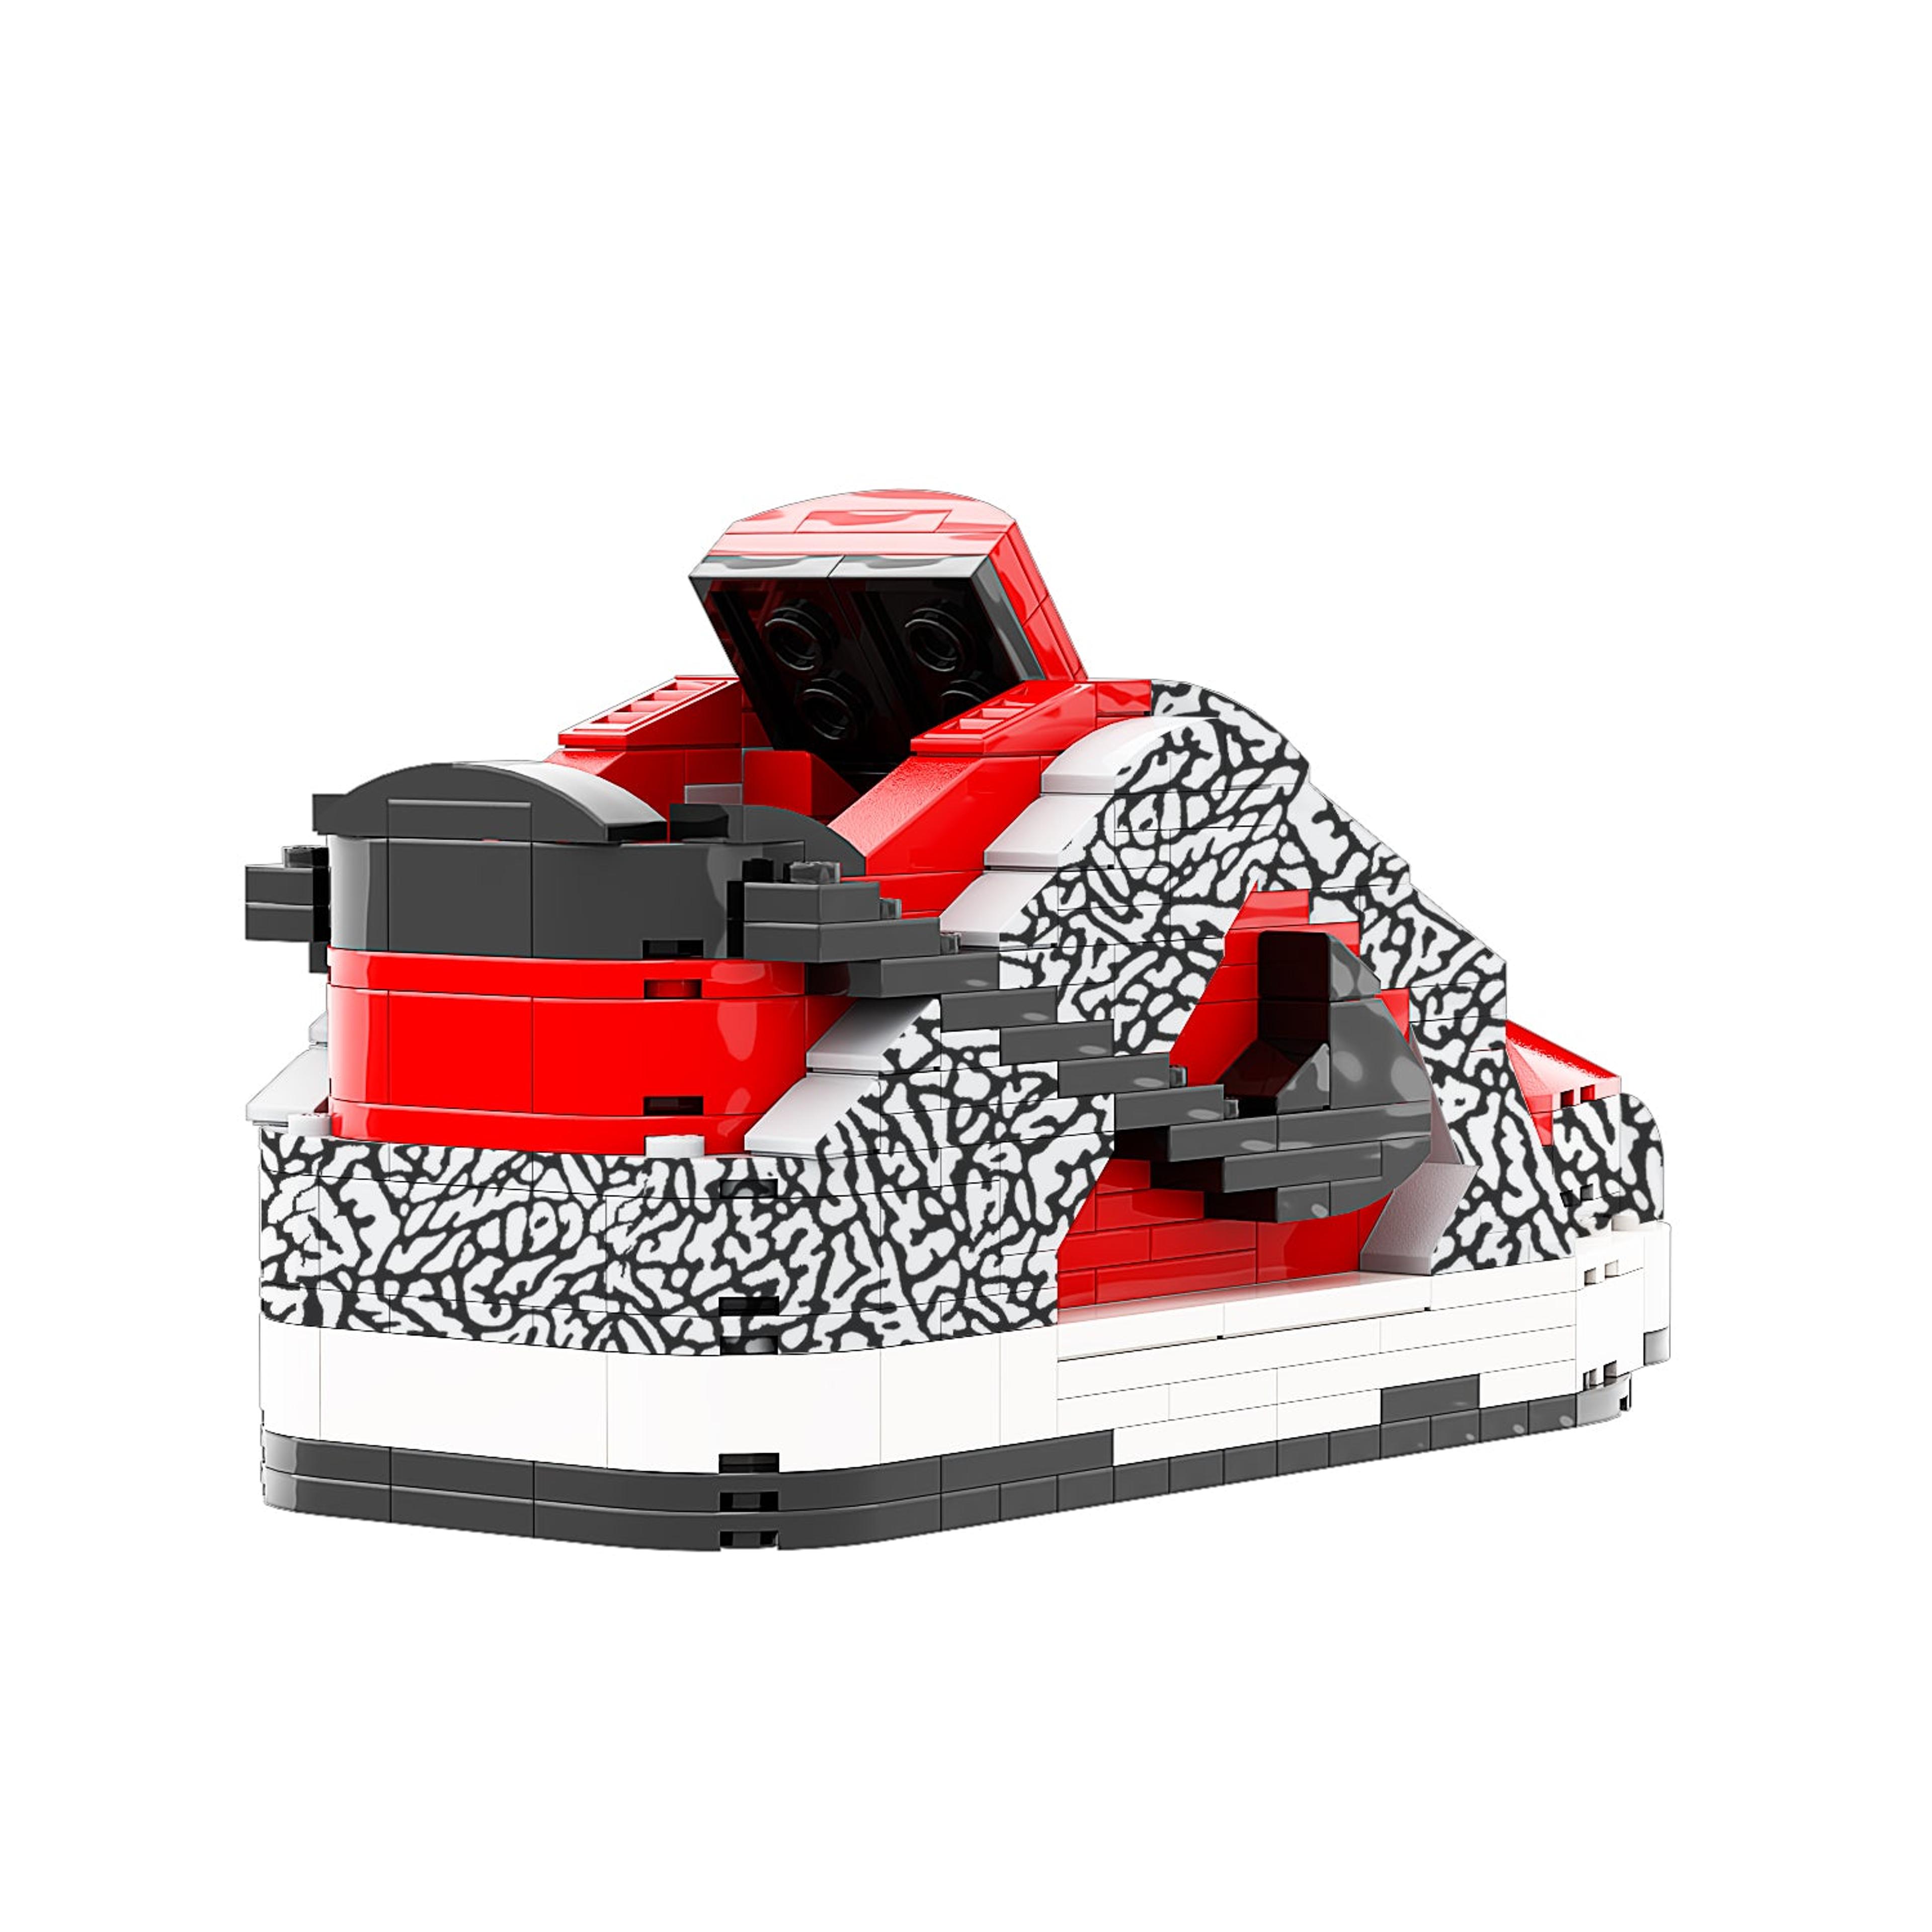 Alternate View 7 of REGULAR SB Dunk SUP "Red Cement" Sneaker Bricks with Mini Figure